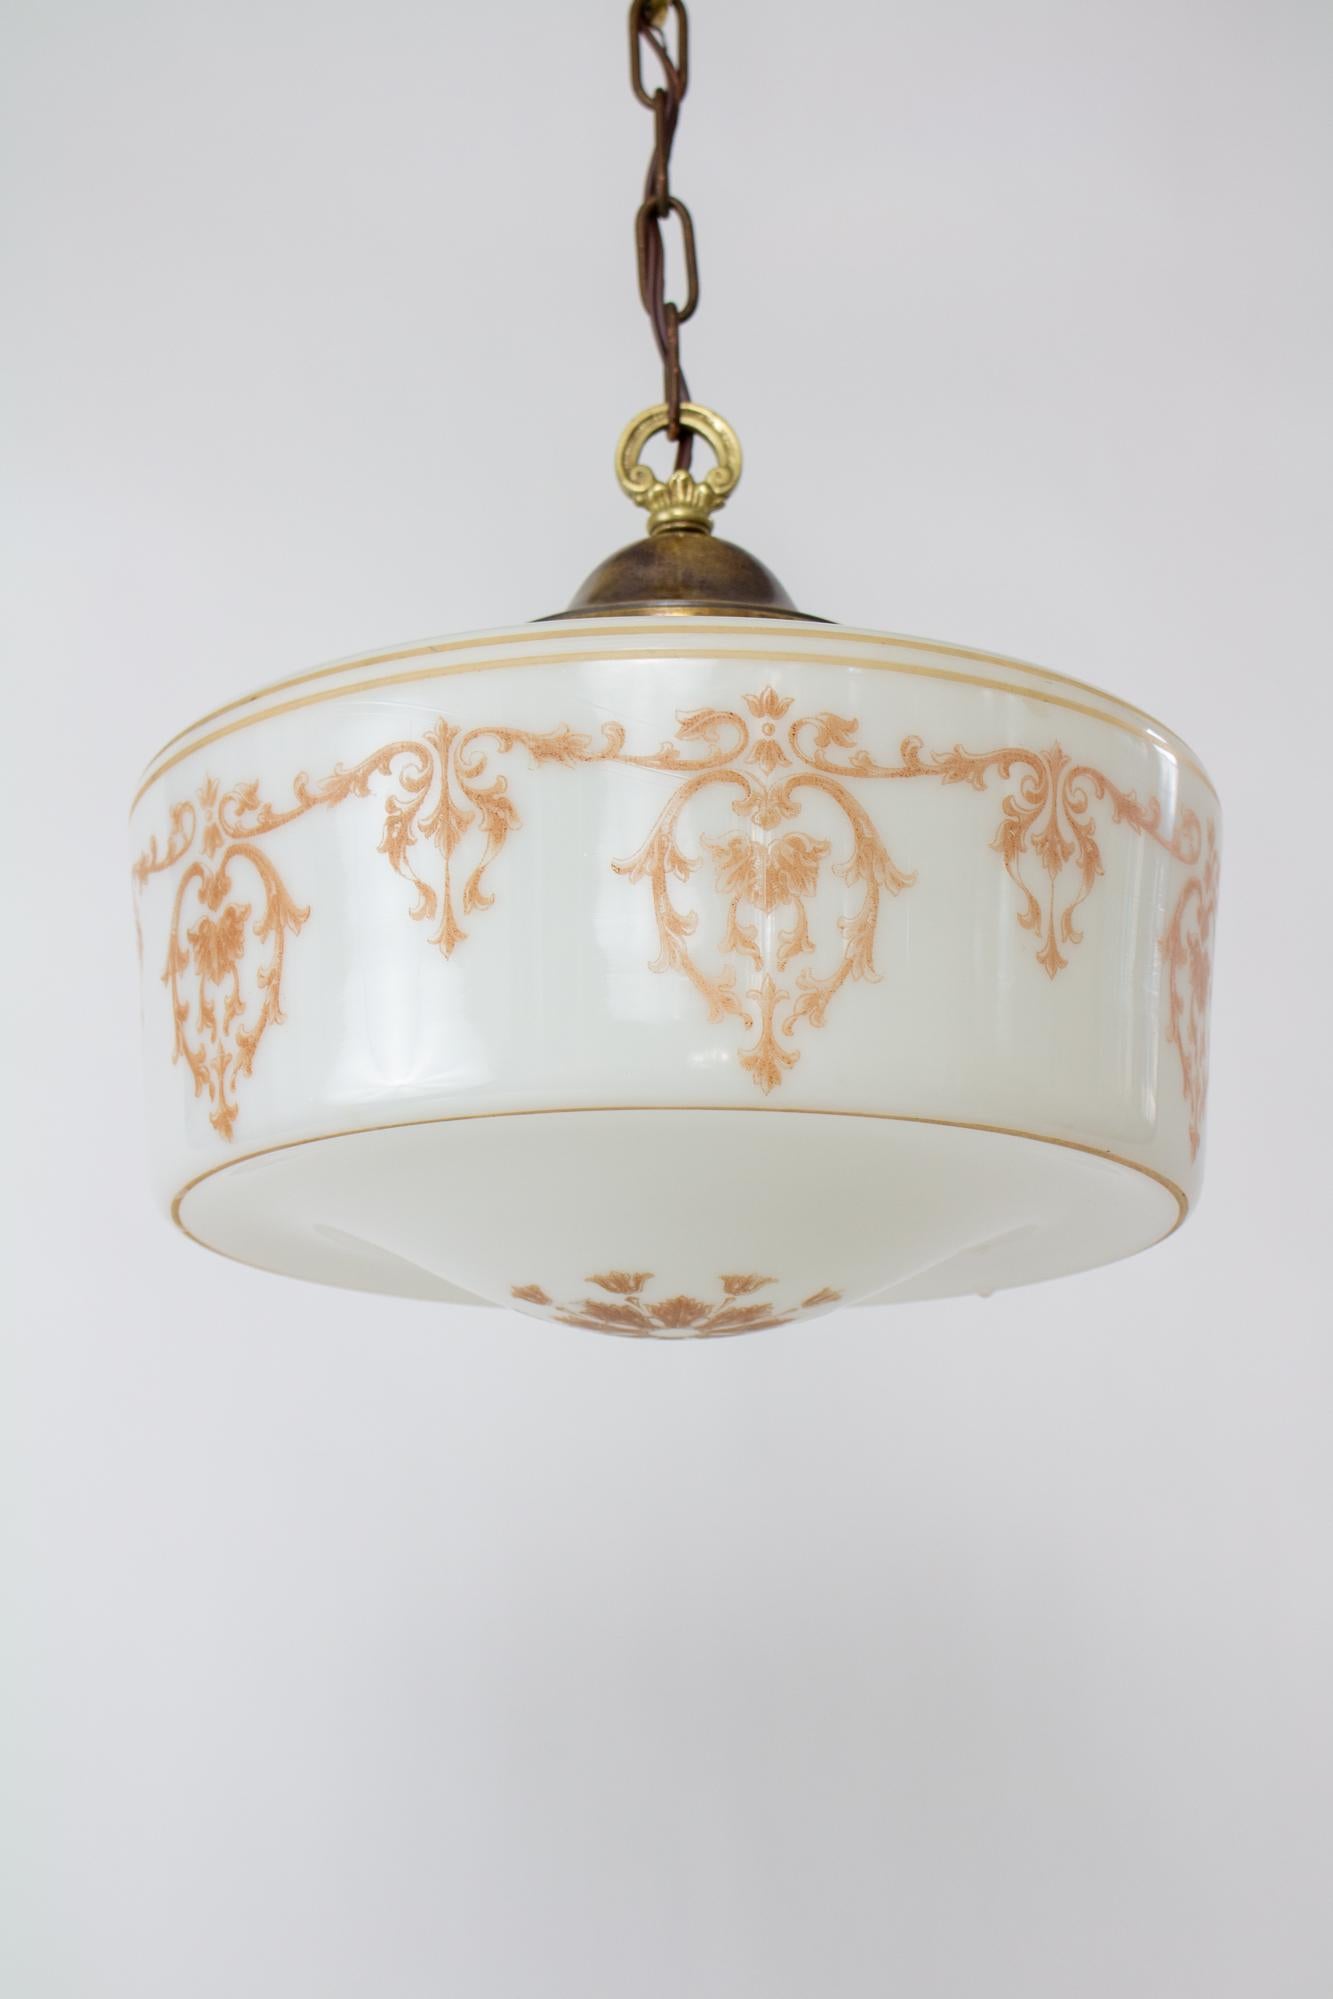 1930’s revival Monax glass applique pendant. Monax glass is often confused with milk glass, but is a translucent white glass with a slight bluish hue. It appears more delicate than milk glass. The glass pendant is in a classic shape of the art deco